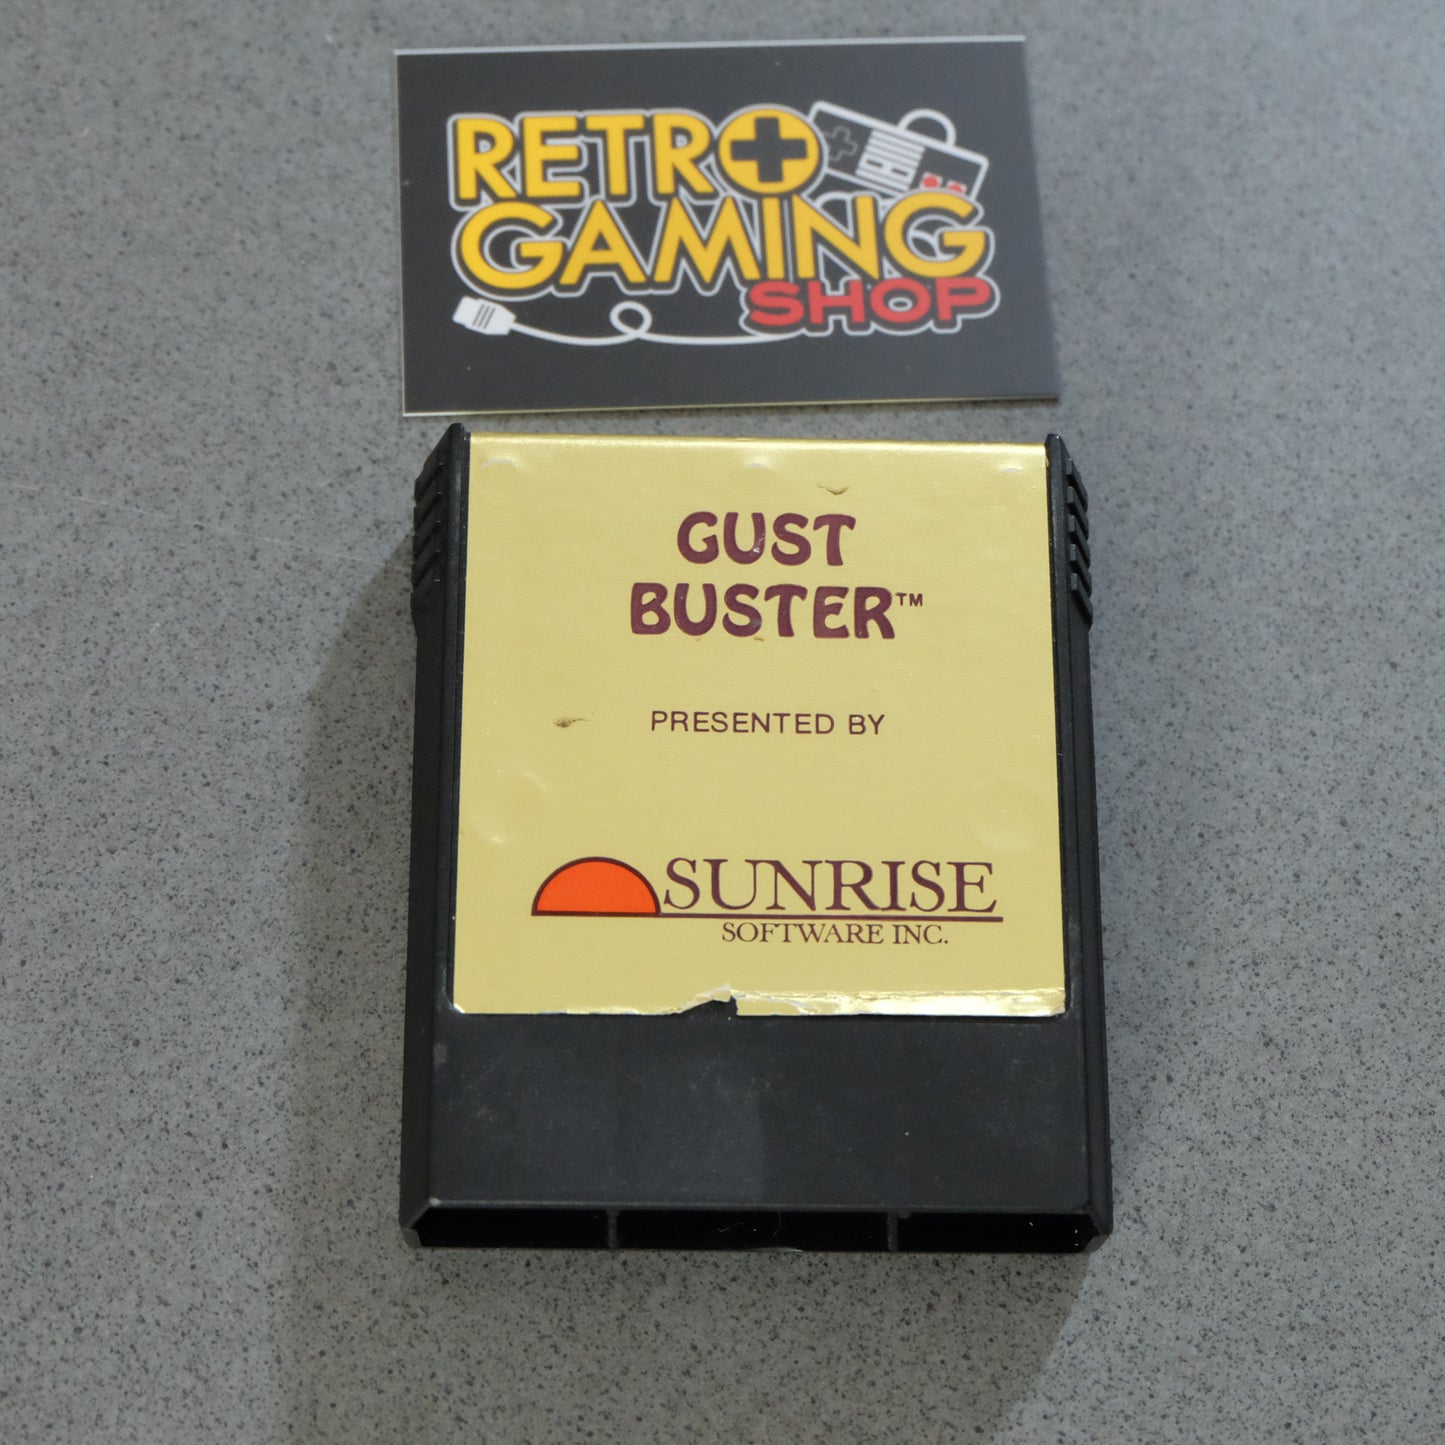 Gust Buster Colecovision